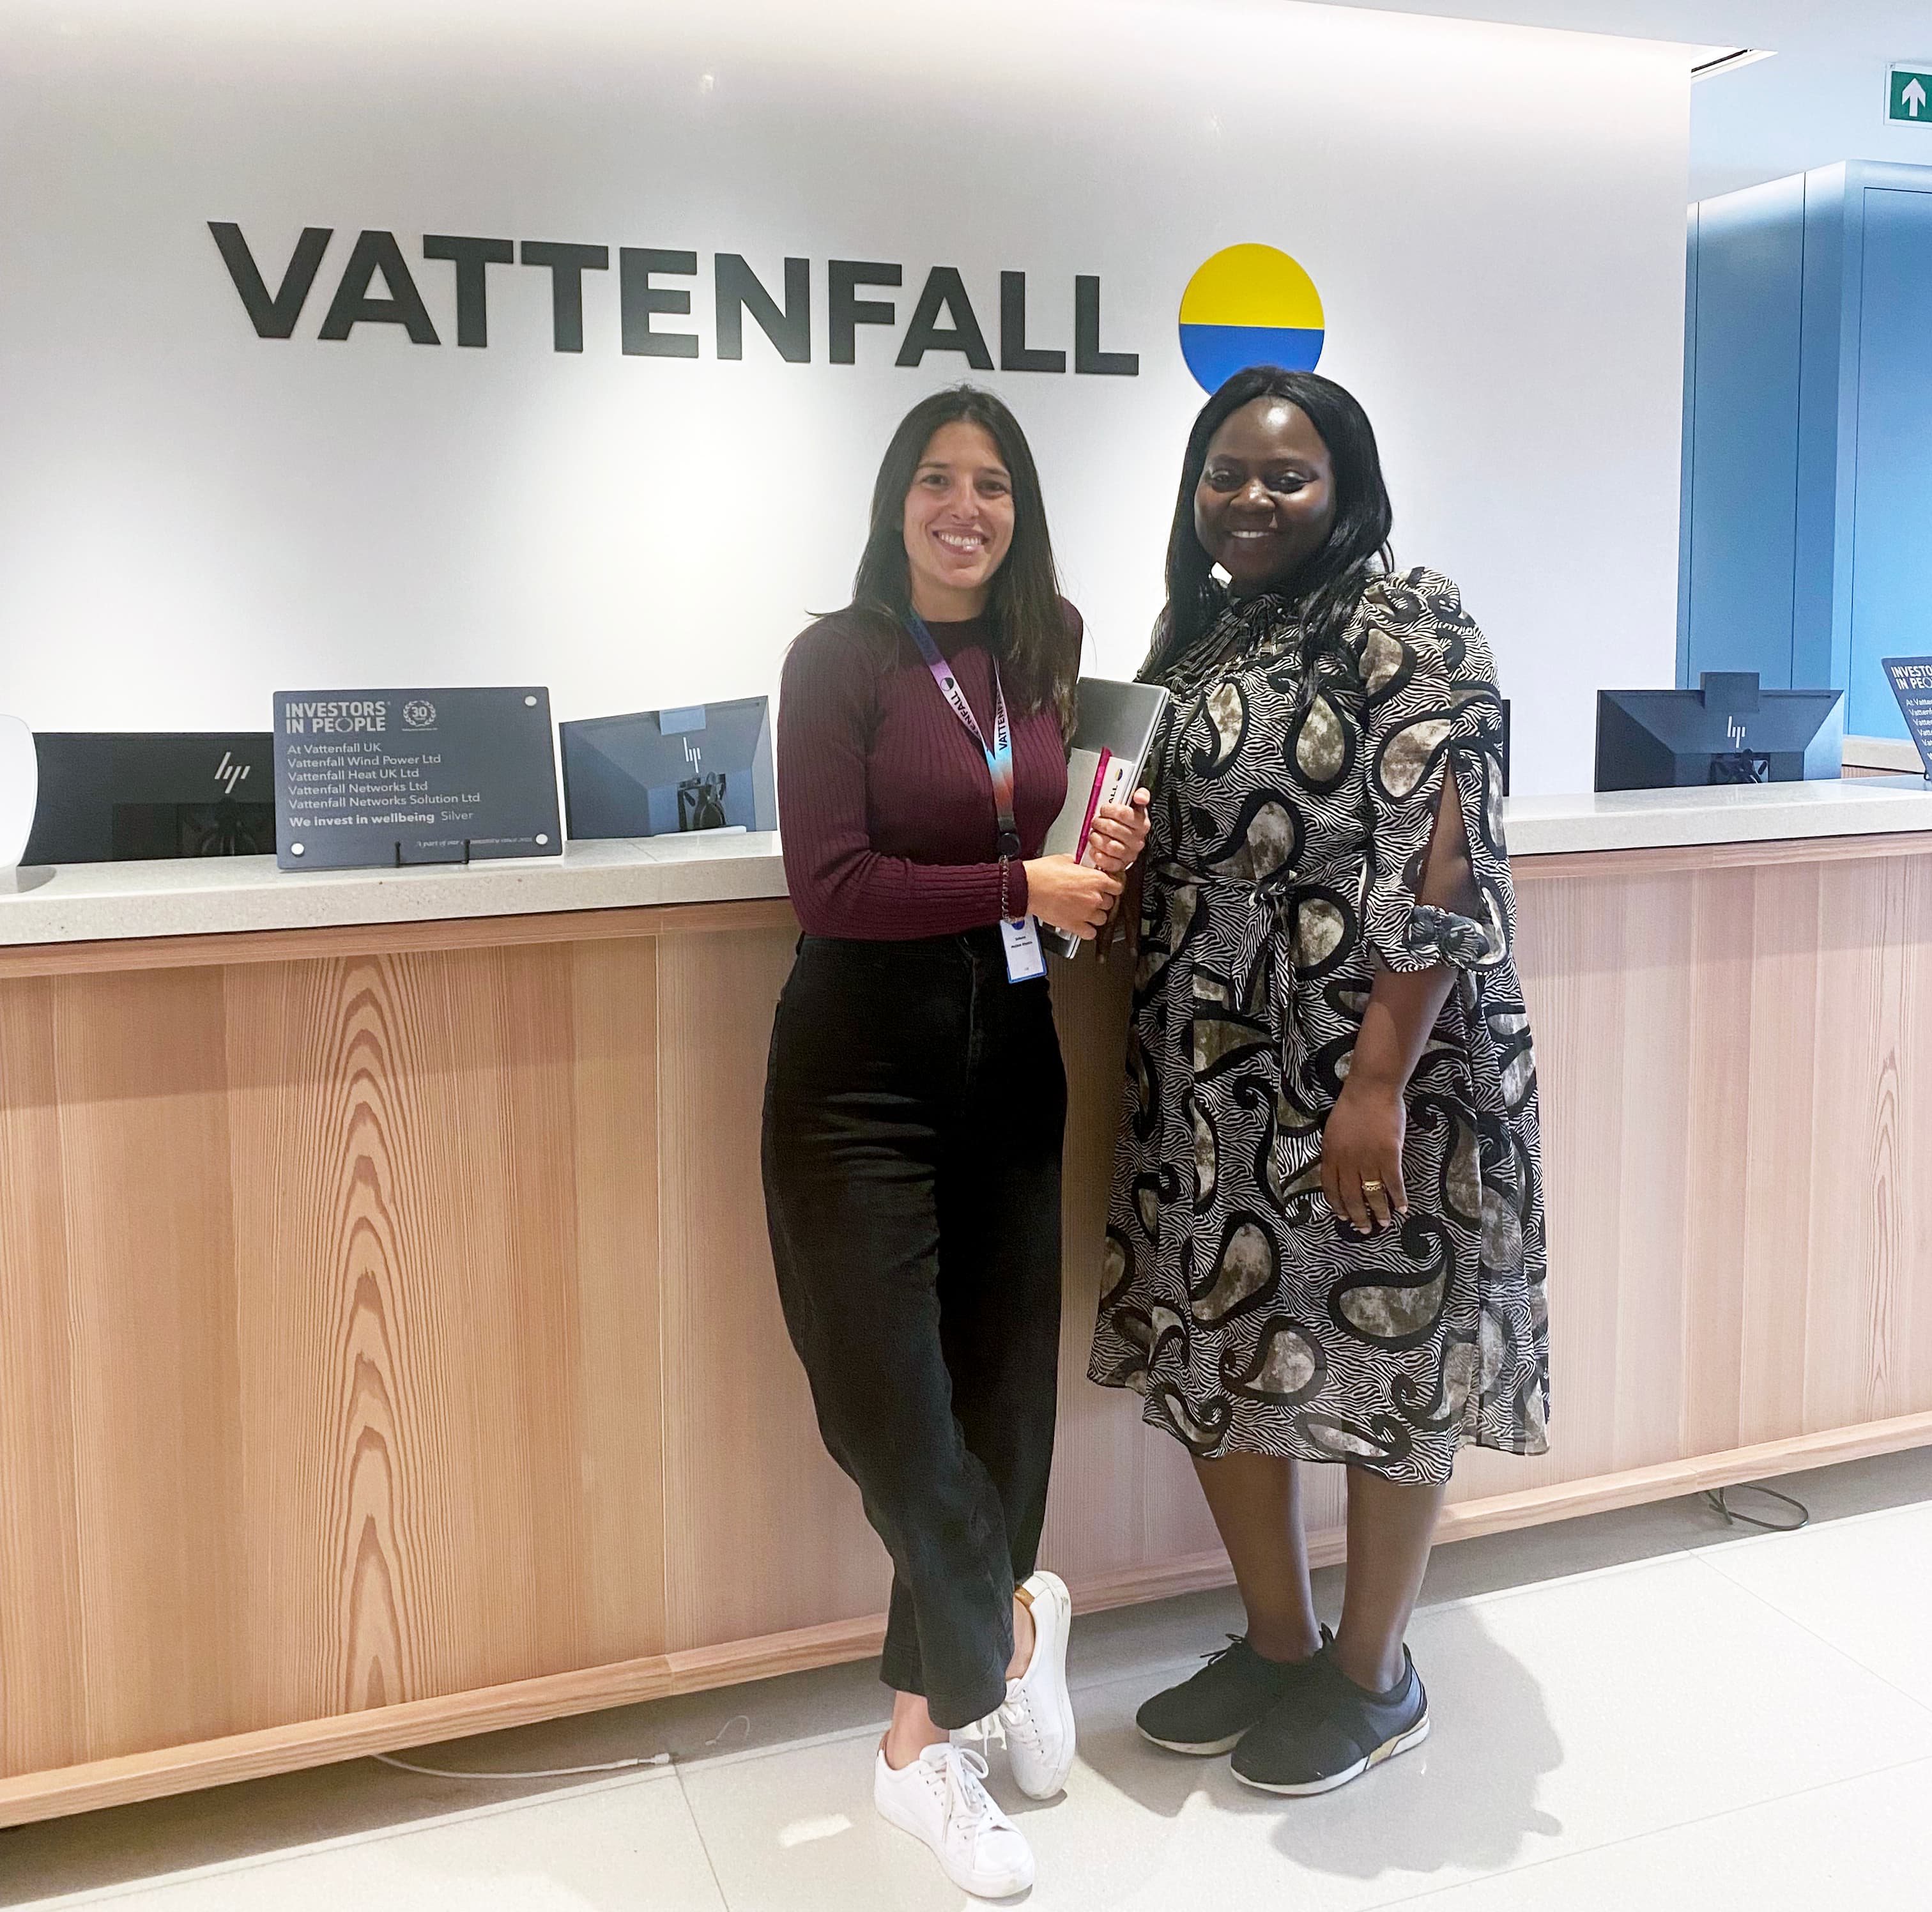 Two women standing at the main desk at Vattenfall HQ